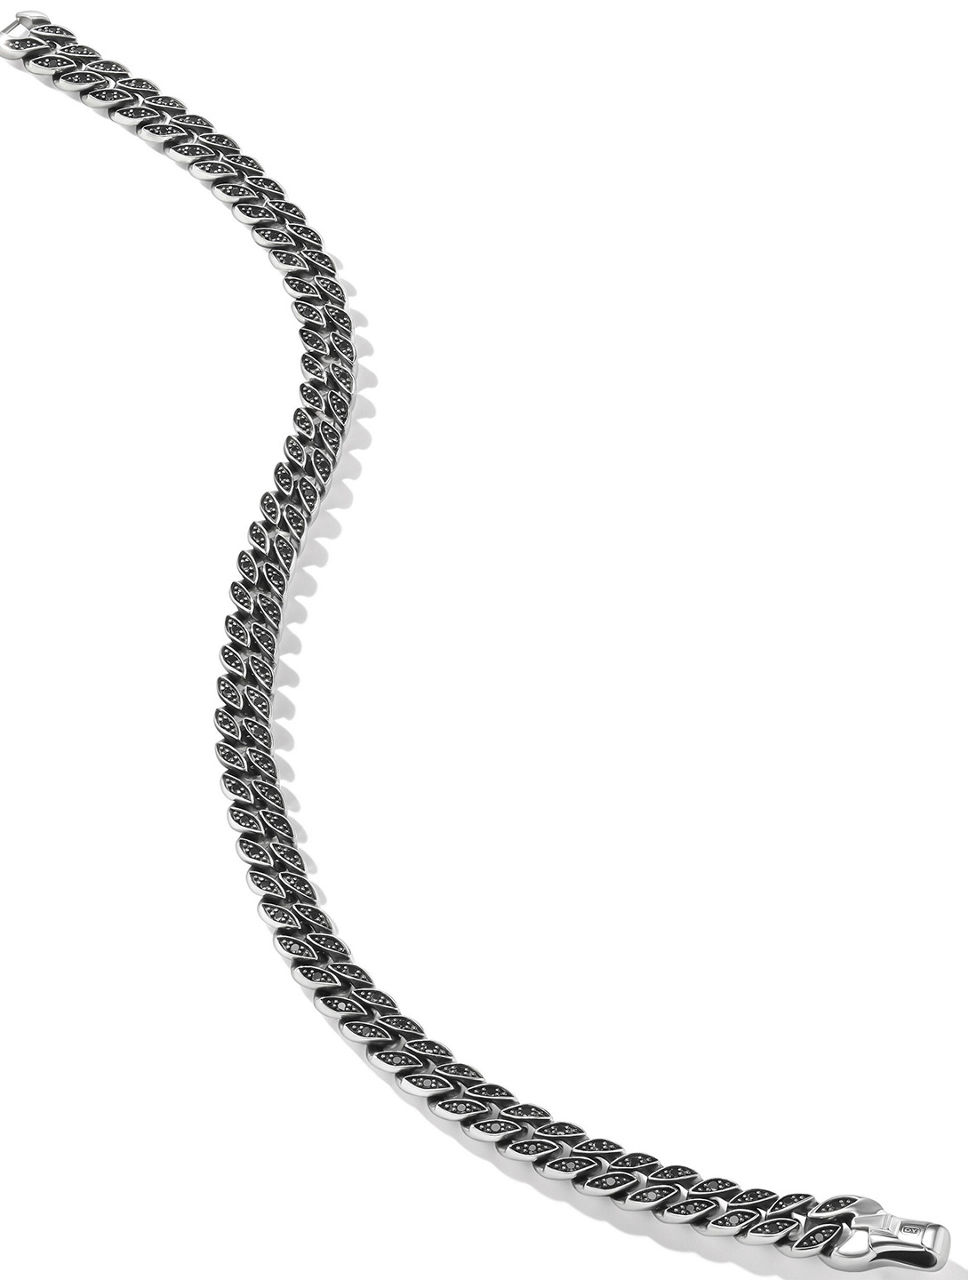 Curb Chain Bracelet Sterling Silver With Black Diamonds, 6mm